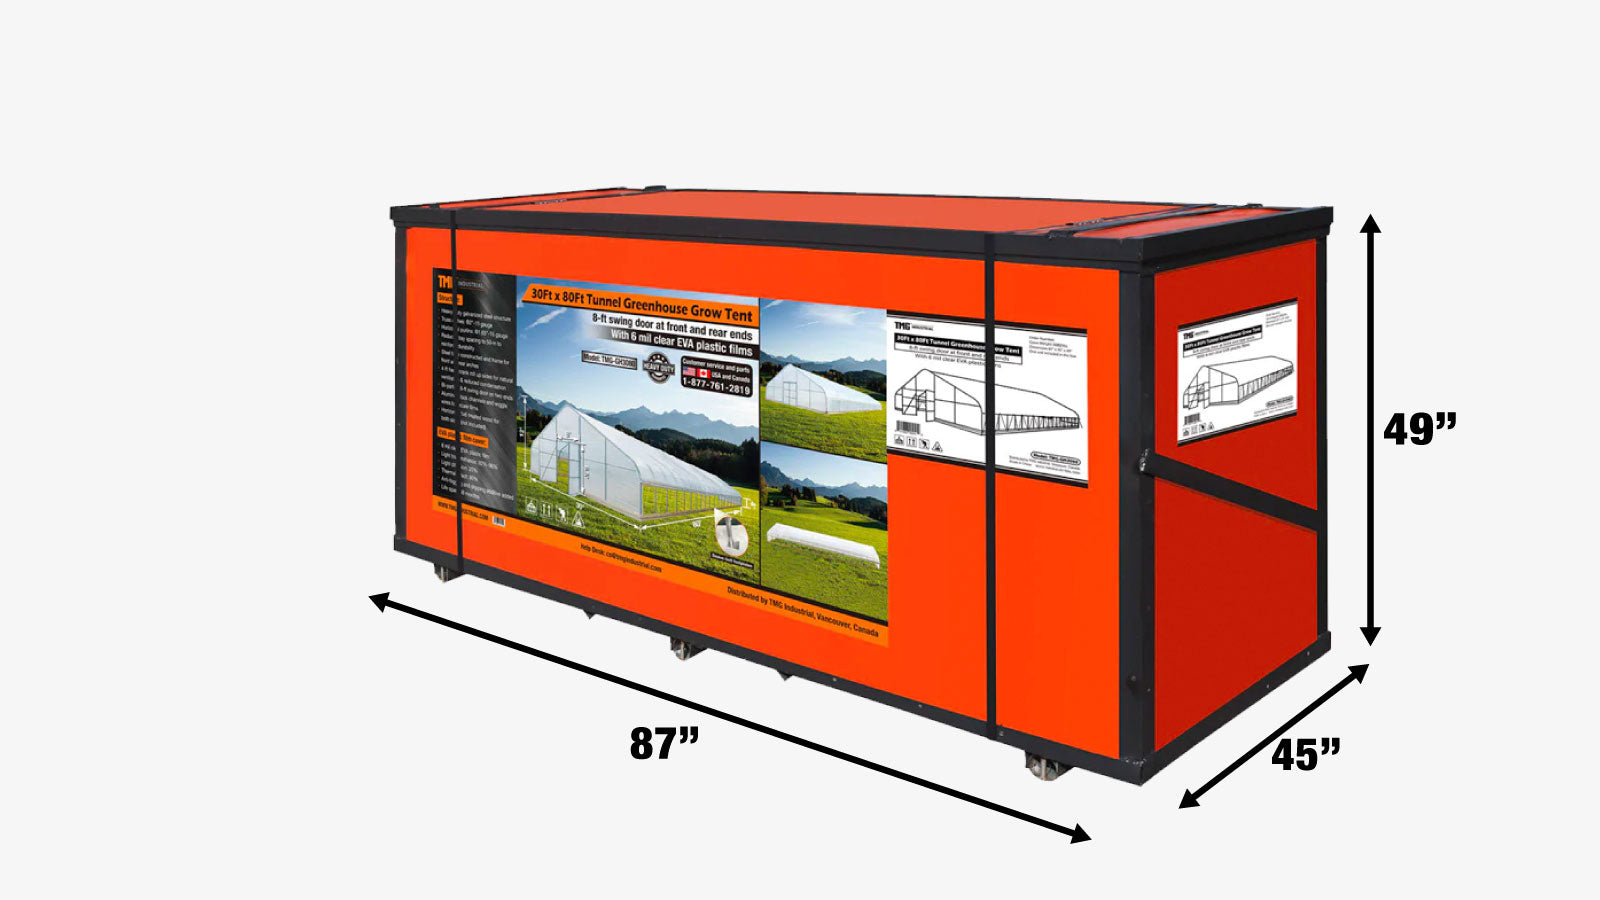 TMG Industrial 30’ x 80’ Tunnel Greenhouse Grow Tent w/6 Mil Clear EVA Plastic Film, Cold Frame, Hand Crank Roll-Up Sides, Peak Ceiling Roof, TMG-GH3080-shipping-info-image